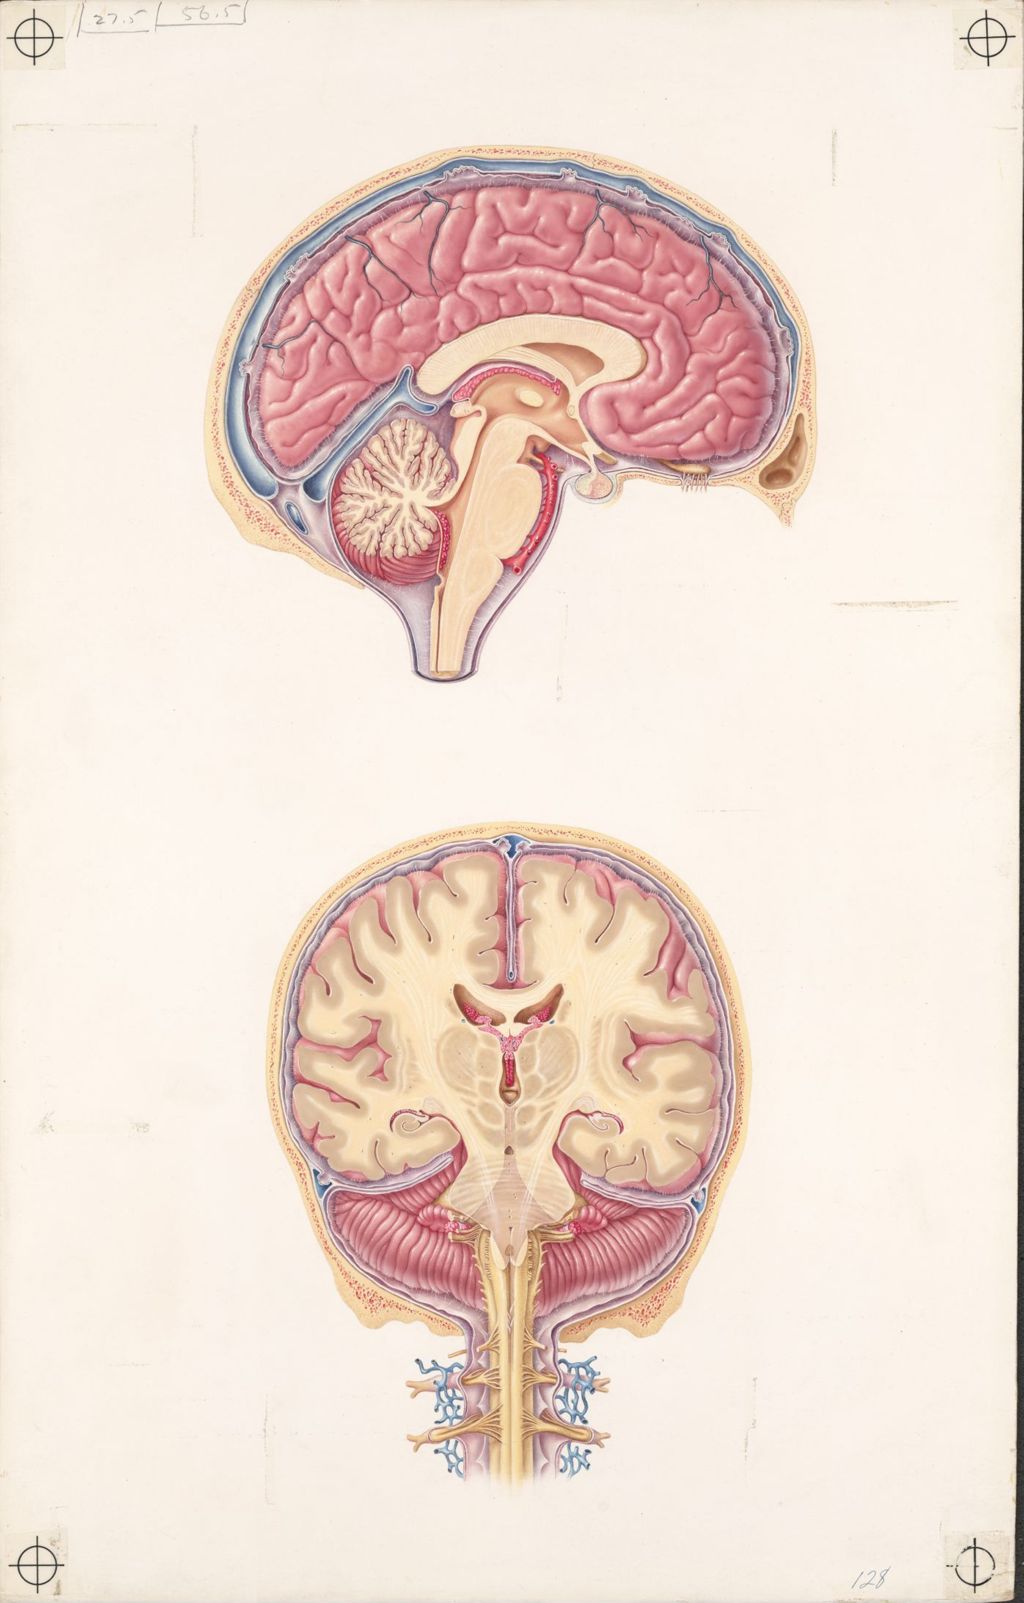 Miniature of Doctor-patient explanatory atlas, Plate 2, Circulation of the cerebrospinal fluid